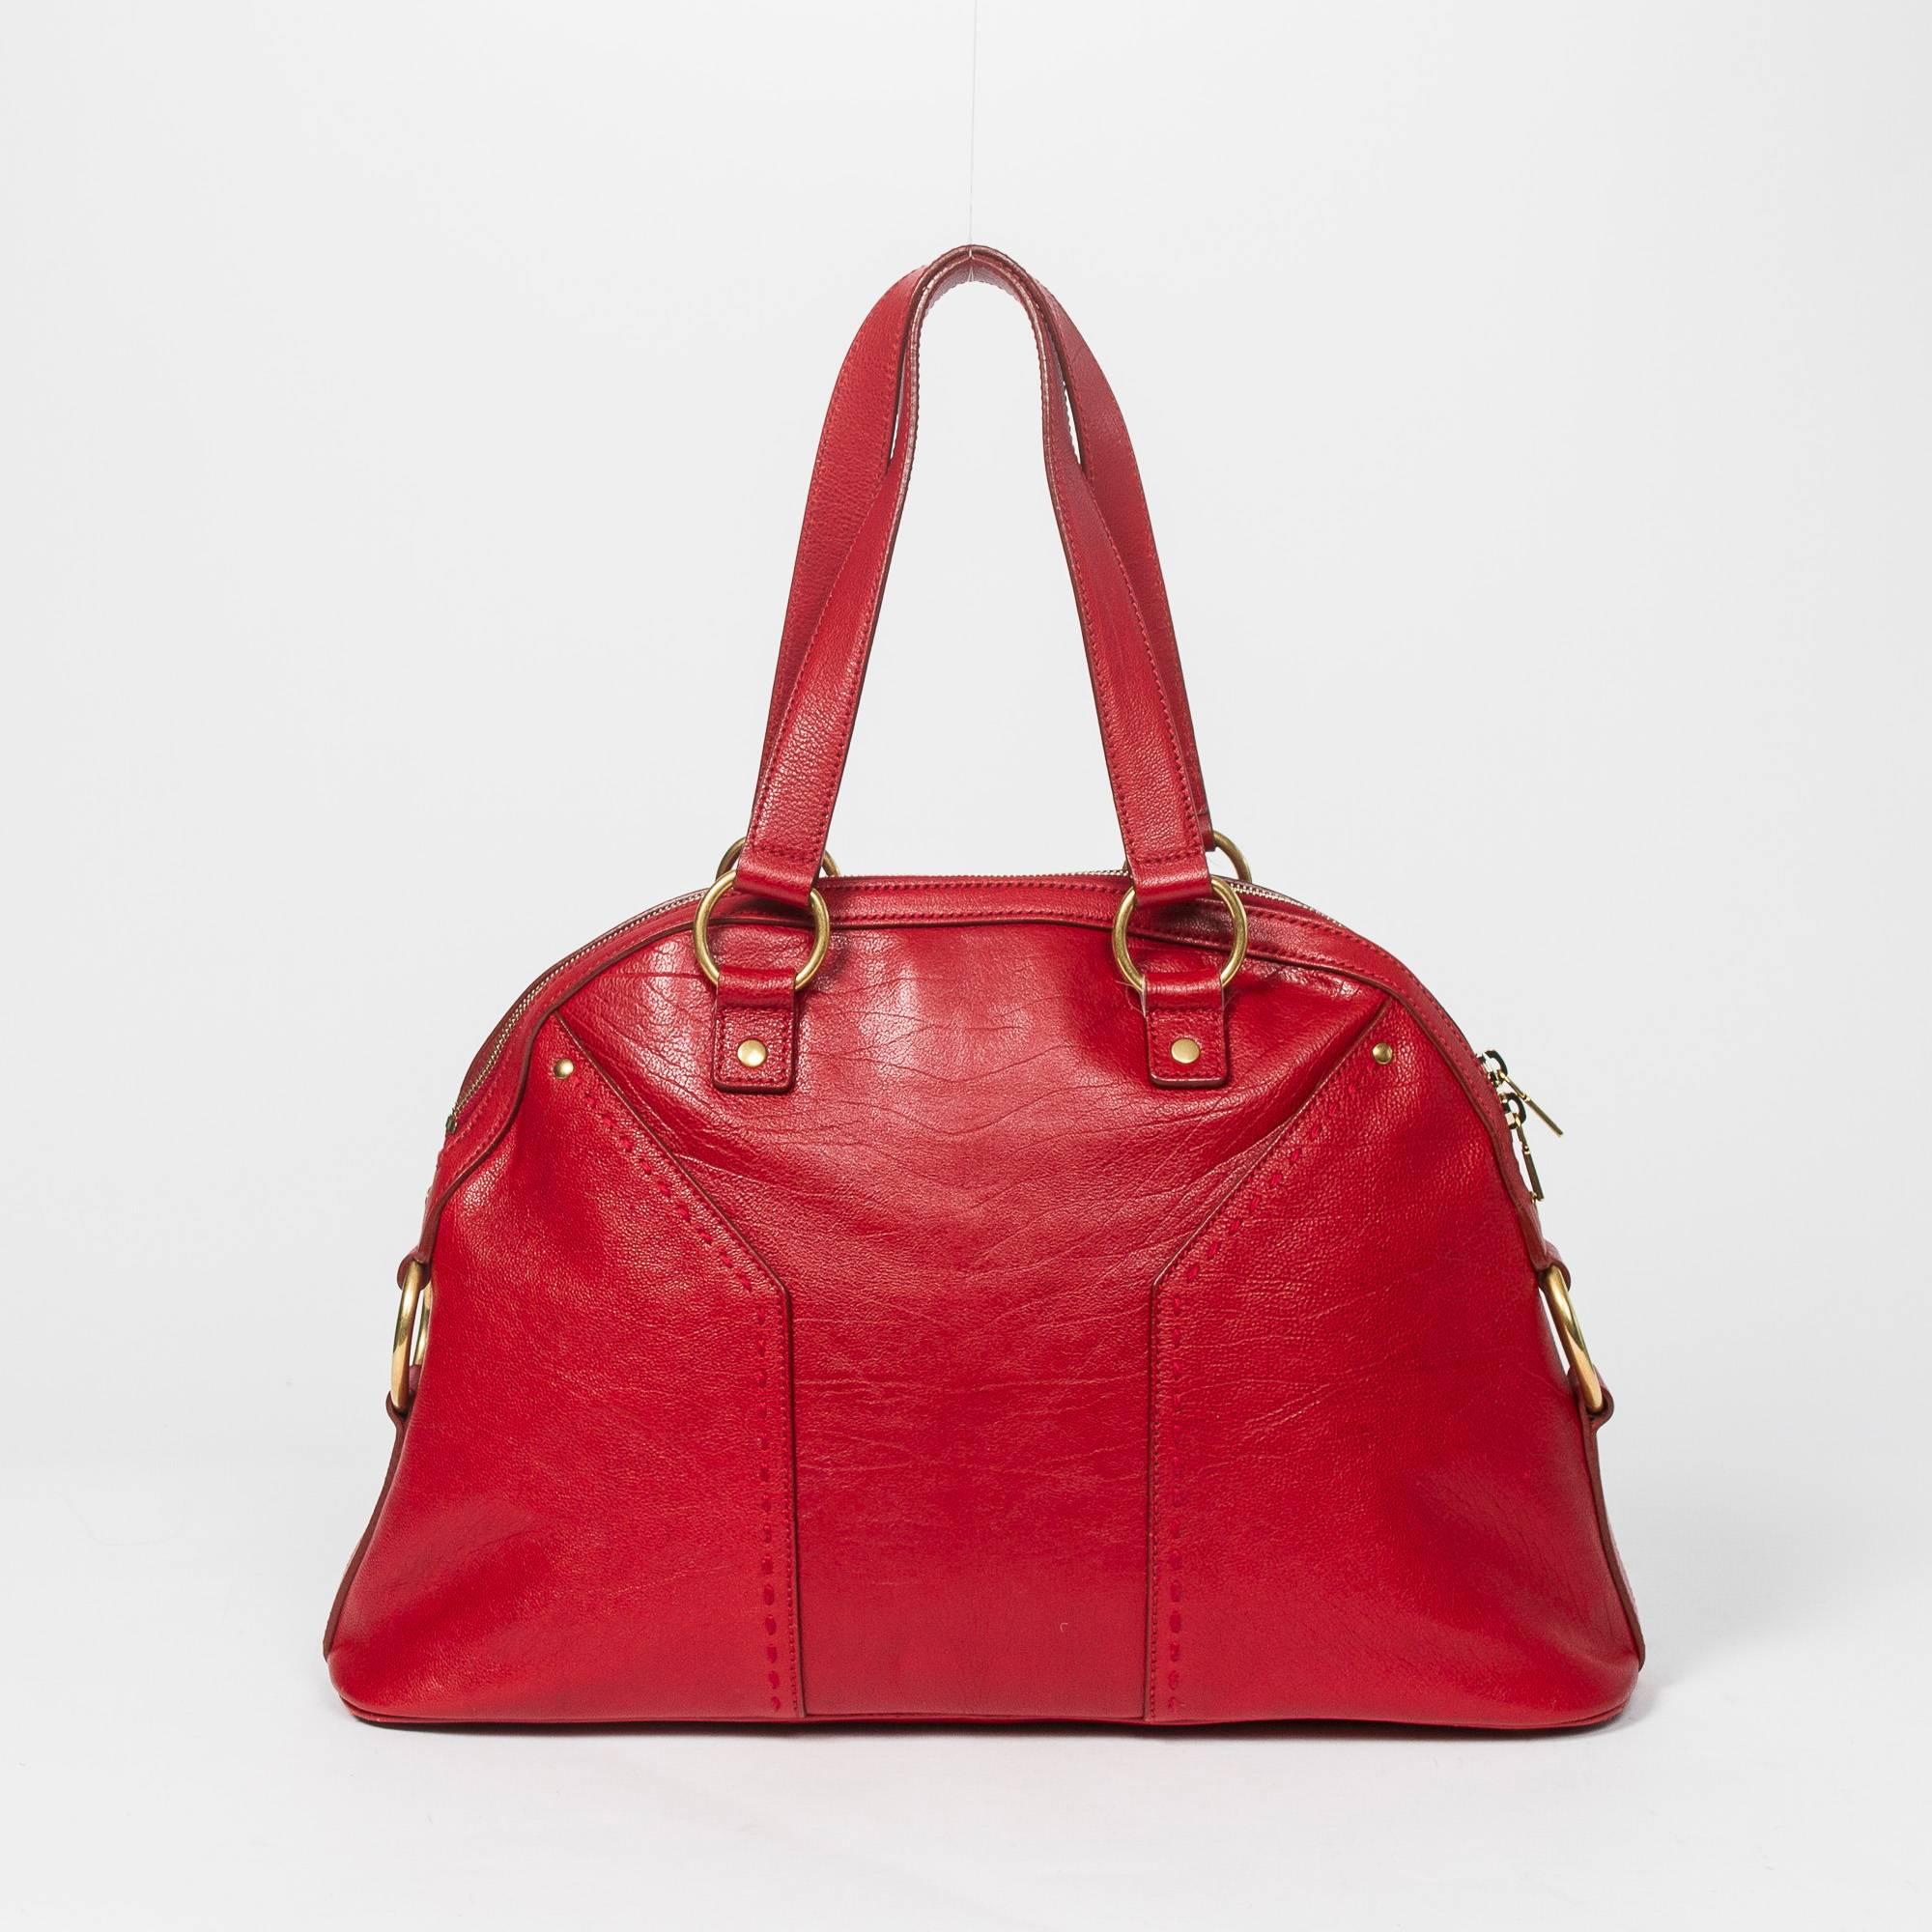 Yves Saint Laurent Muse 1 in Red calf leather In Excellent Condition For Sale In Dublin, IE